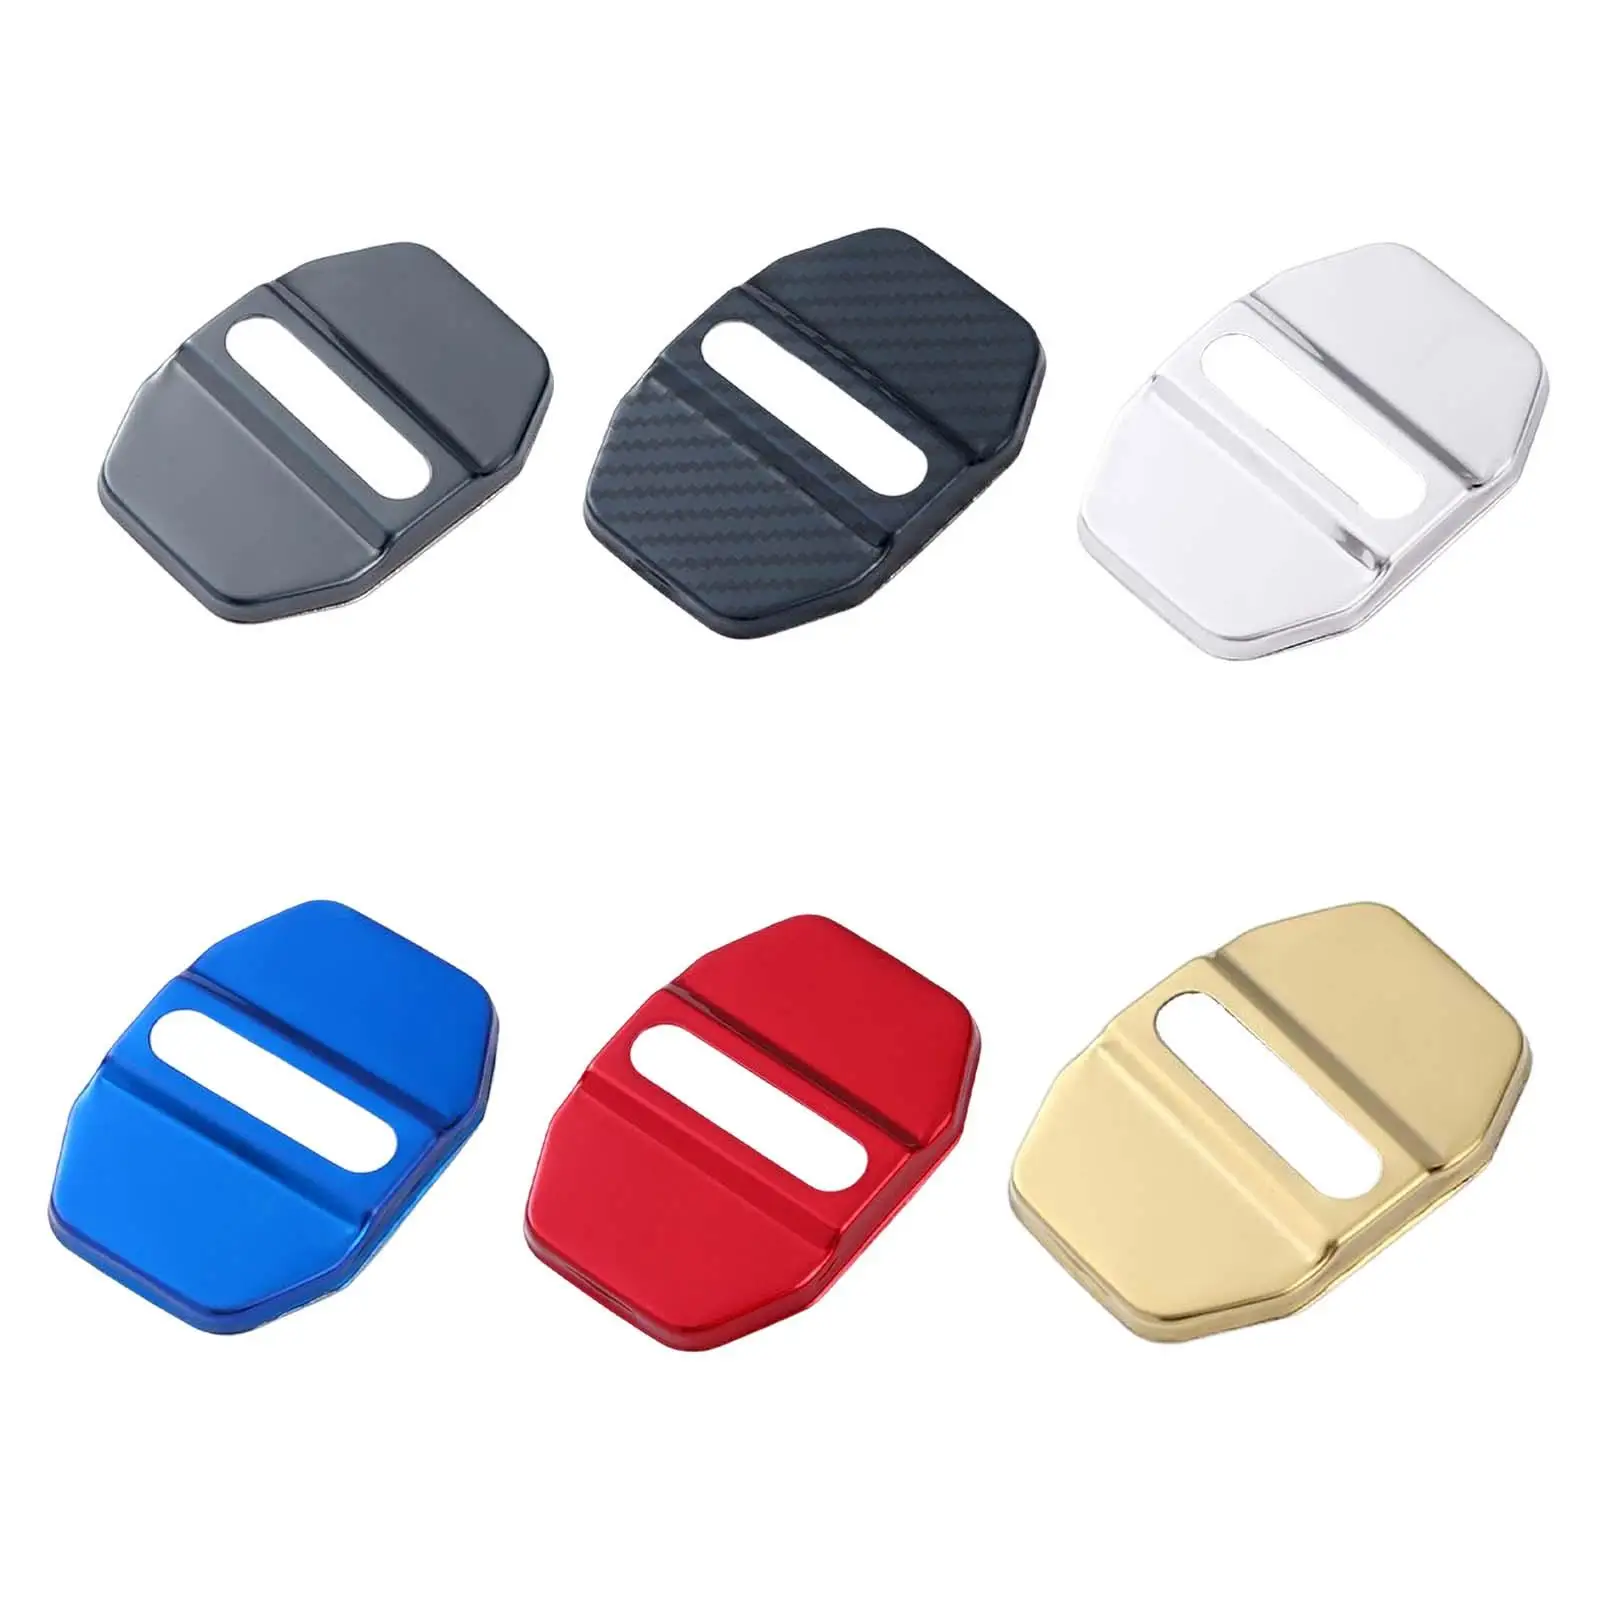 4 Pcs Car Door Lock latches Covers Rustproof Stainless Decorative Covers Protection Cover Fit for Mercedes S C E CLS Class